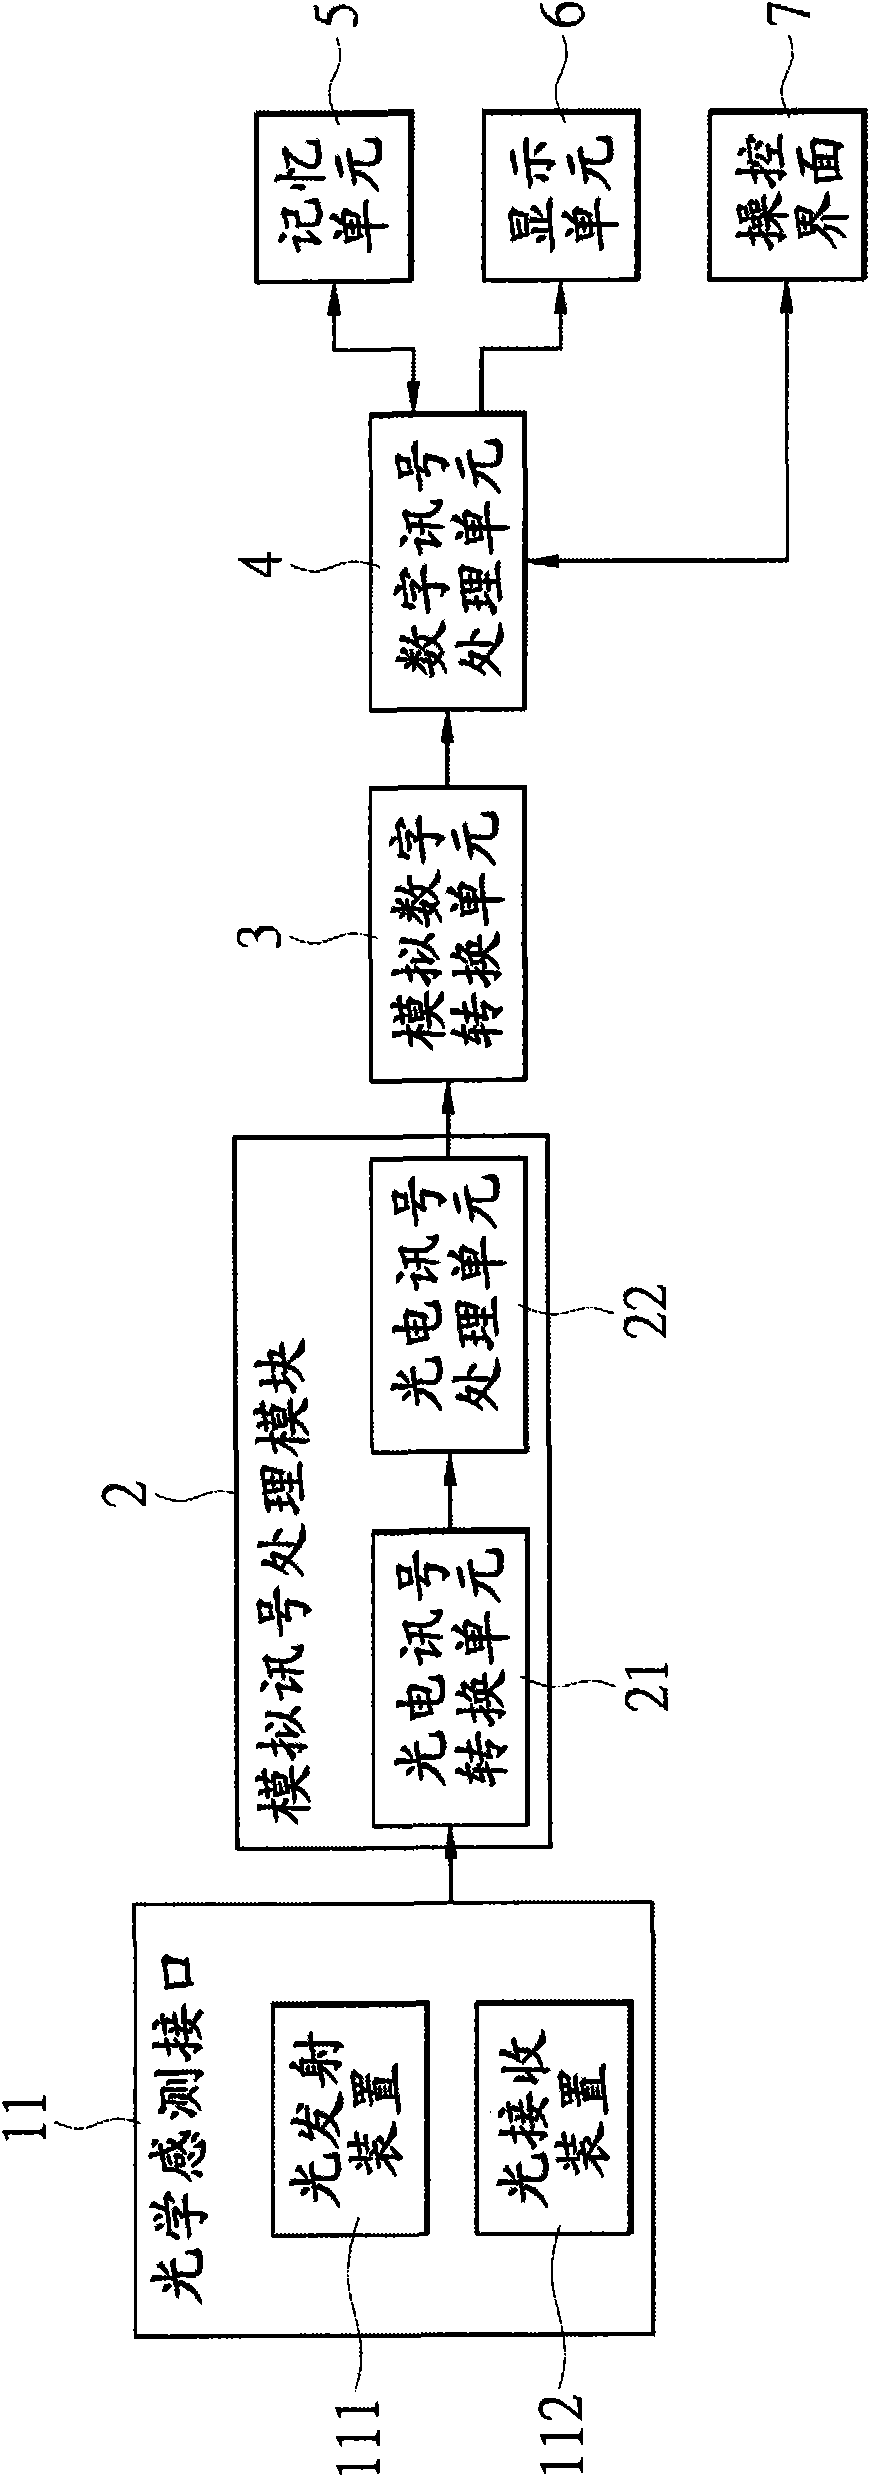 Physiological signal detecting system and method